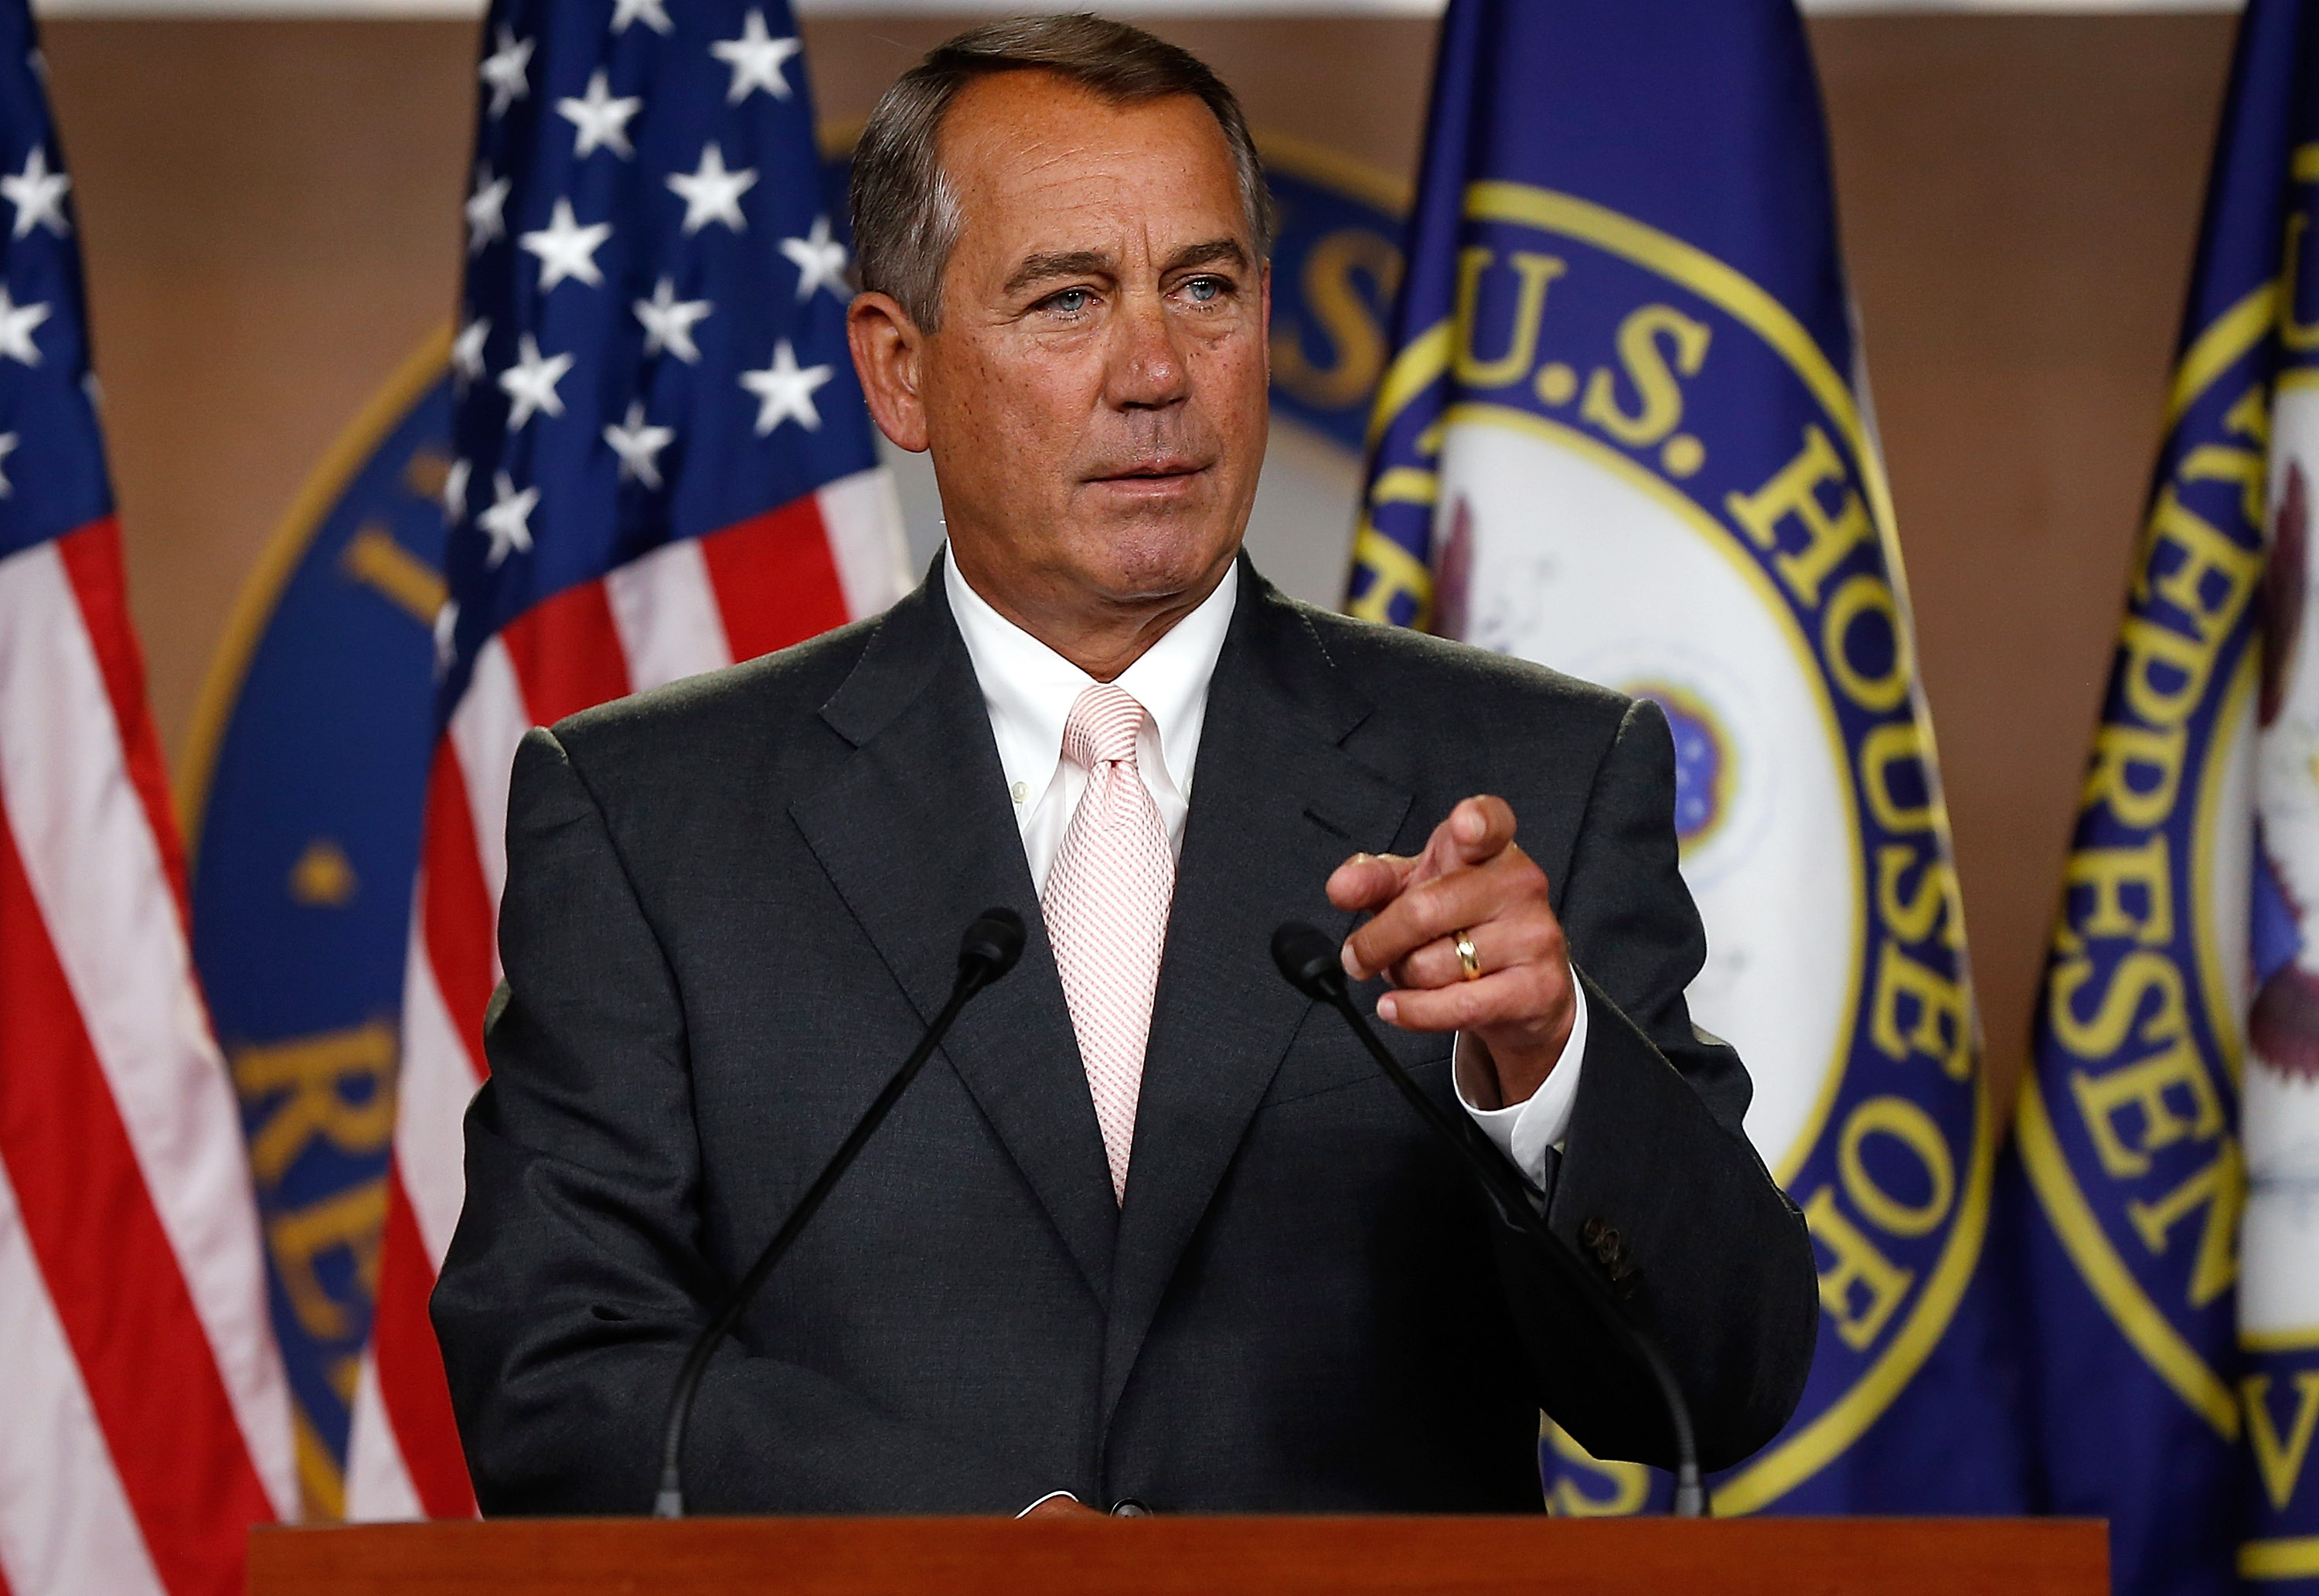 U.S. Speaker of the House John Boehner (R-OH) answers questions during his weekly press conference at the U.S. Capitol July 10, 2014 in Washington, DC. (Win McNamee—Getty Images)